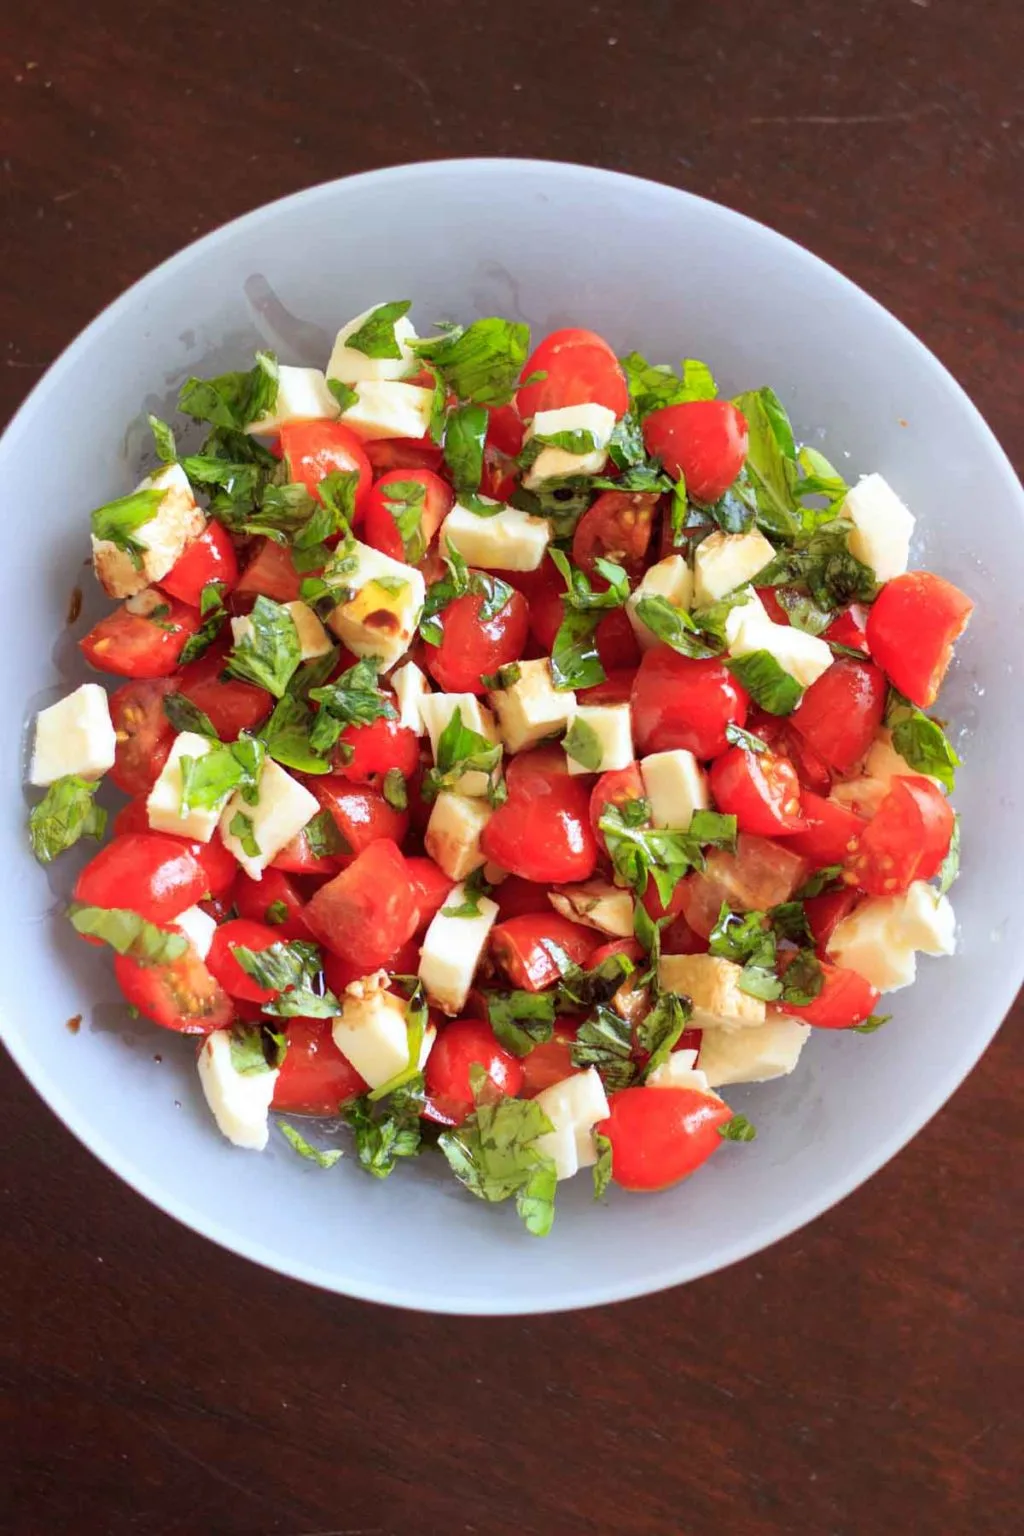 A delicious recipe for chopped Caprese salad! Only 5 ingredients for his crowd-pleasing vegetarian appetizer dish that is so easy to toss together for any occasion. Summer cookouts, potluck dinners, family apps, or a lunch for one. Easy to make in a big batch for many people or a small amount for a few side dishes. Gluten-free and low carb with fresh basil, mozzarella, chopped tomato, and balsamic vinegar or glaze!